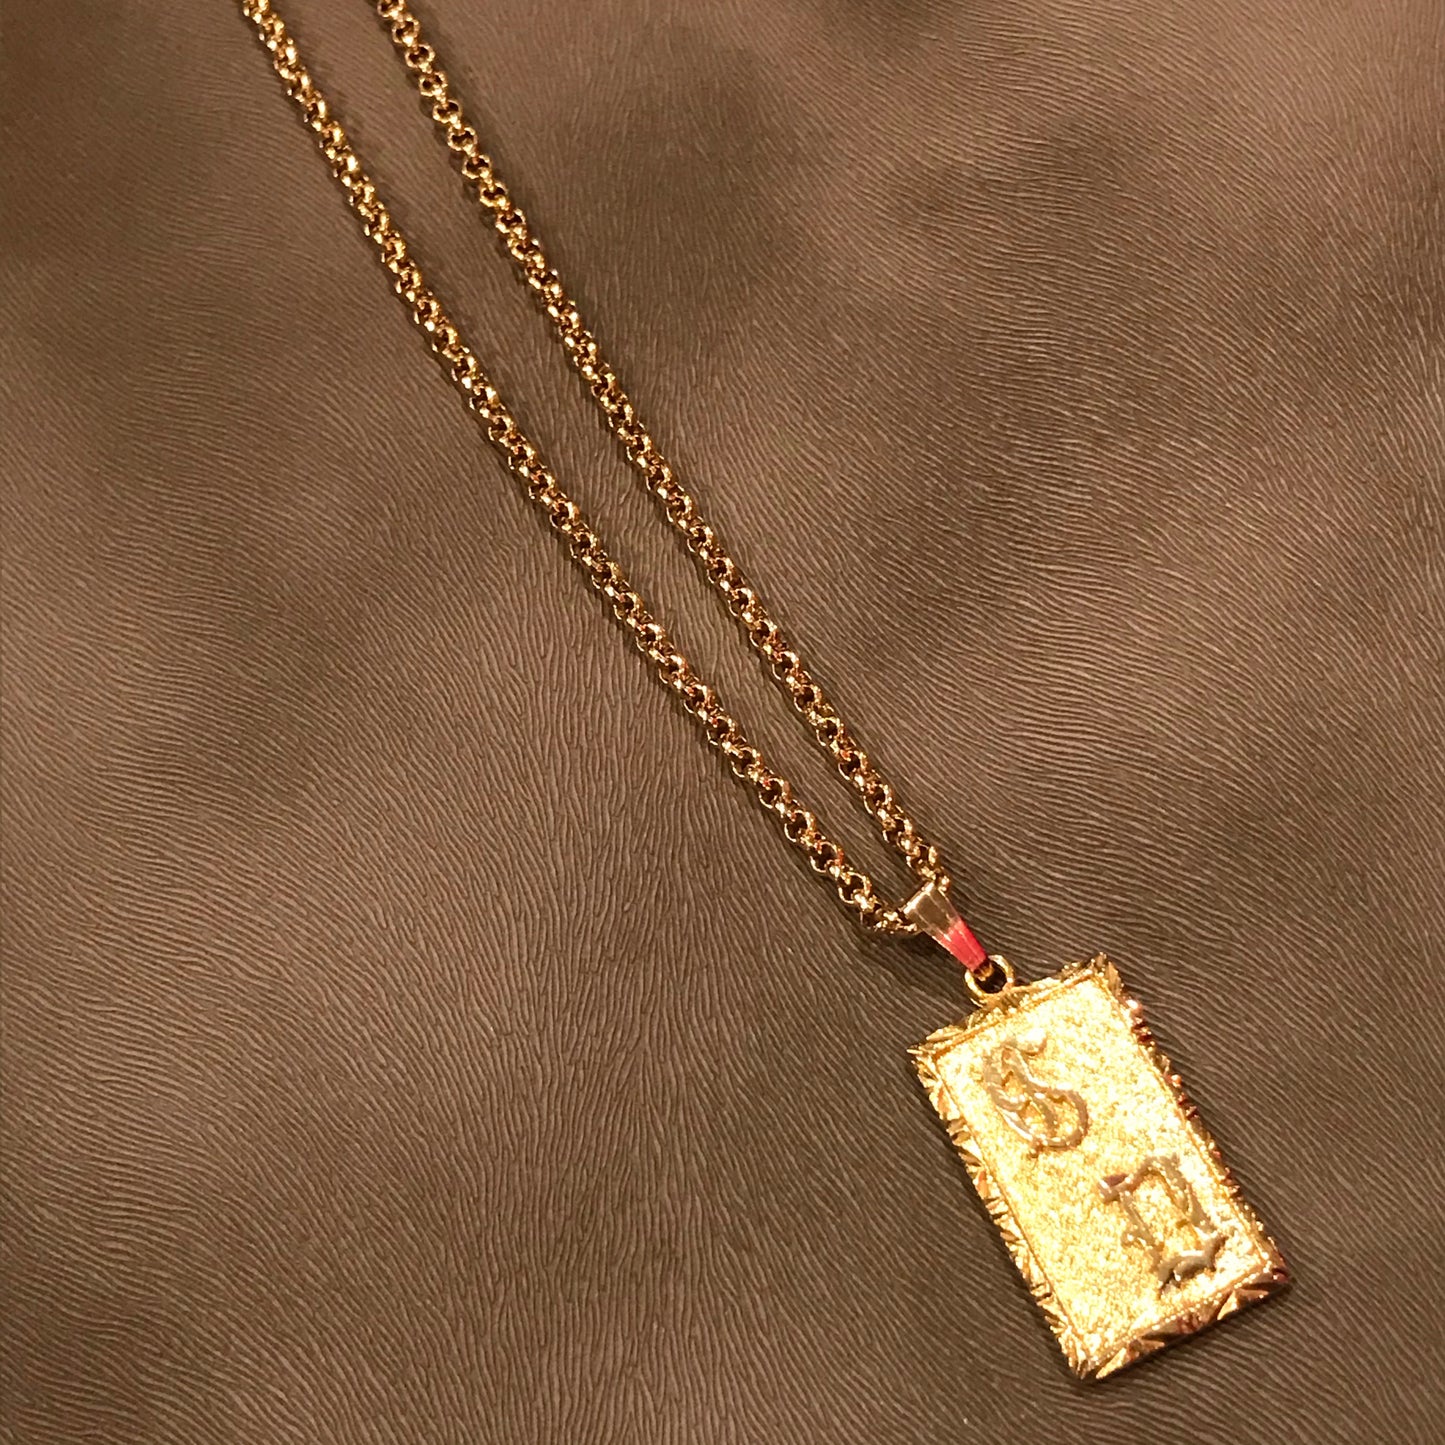 'Gold Digger' Necklace 18K plated